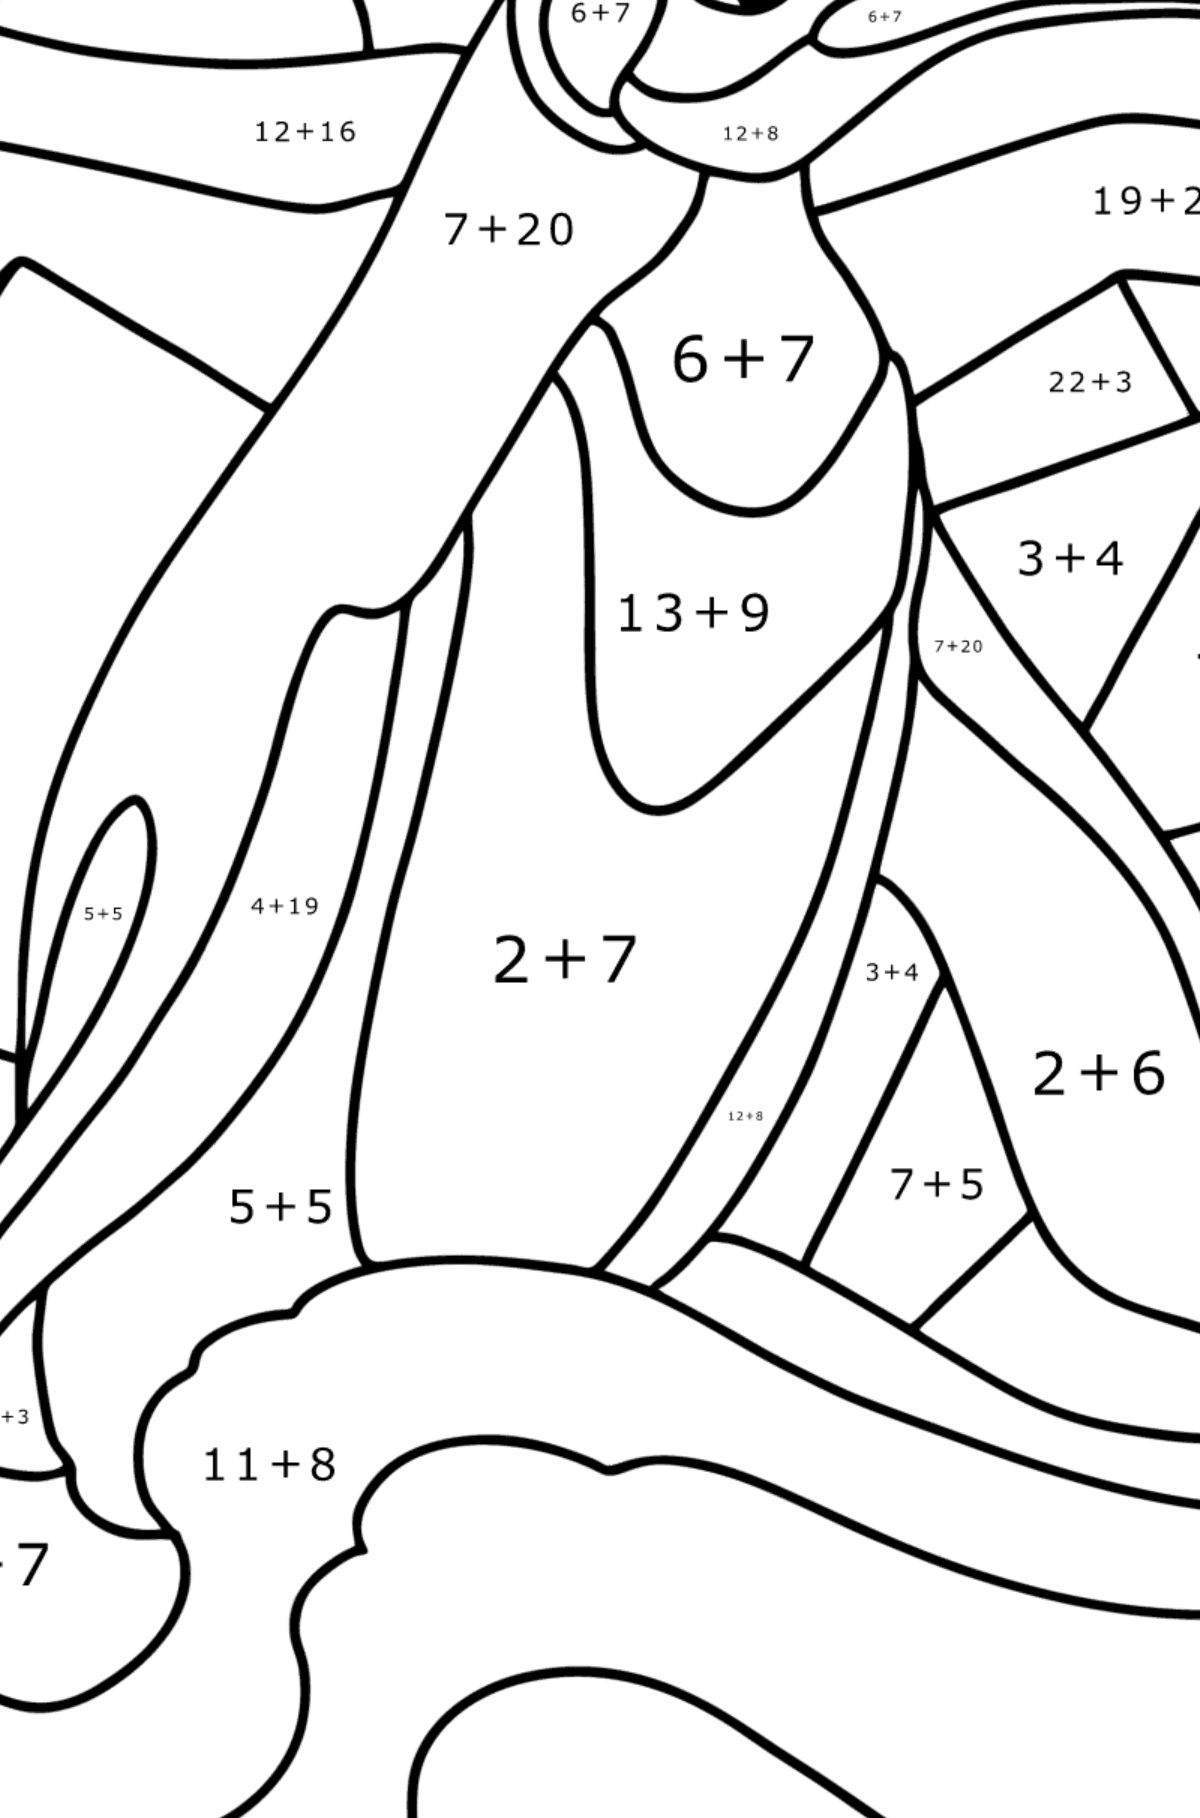 King penguin coloring page - Math Coloring - Addition for Kids